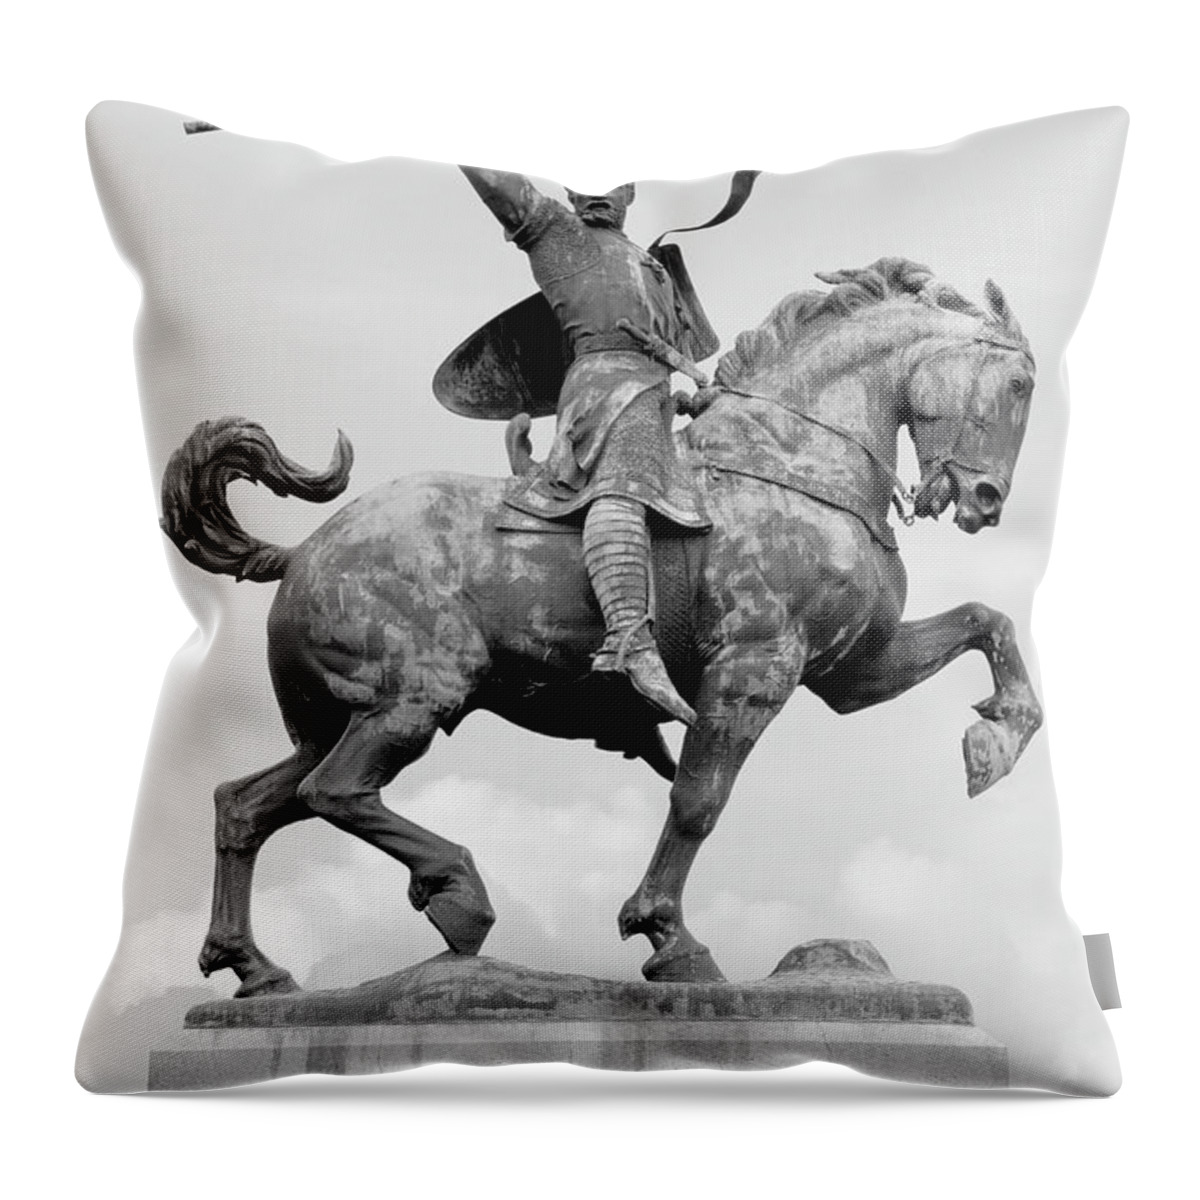 El Cid Throw Pillow featuring the photograph El Cid Campeador Statue Palace of the Legion of Honor San Francisco California 2 by Kathy Anselmo